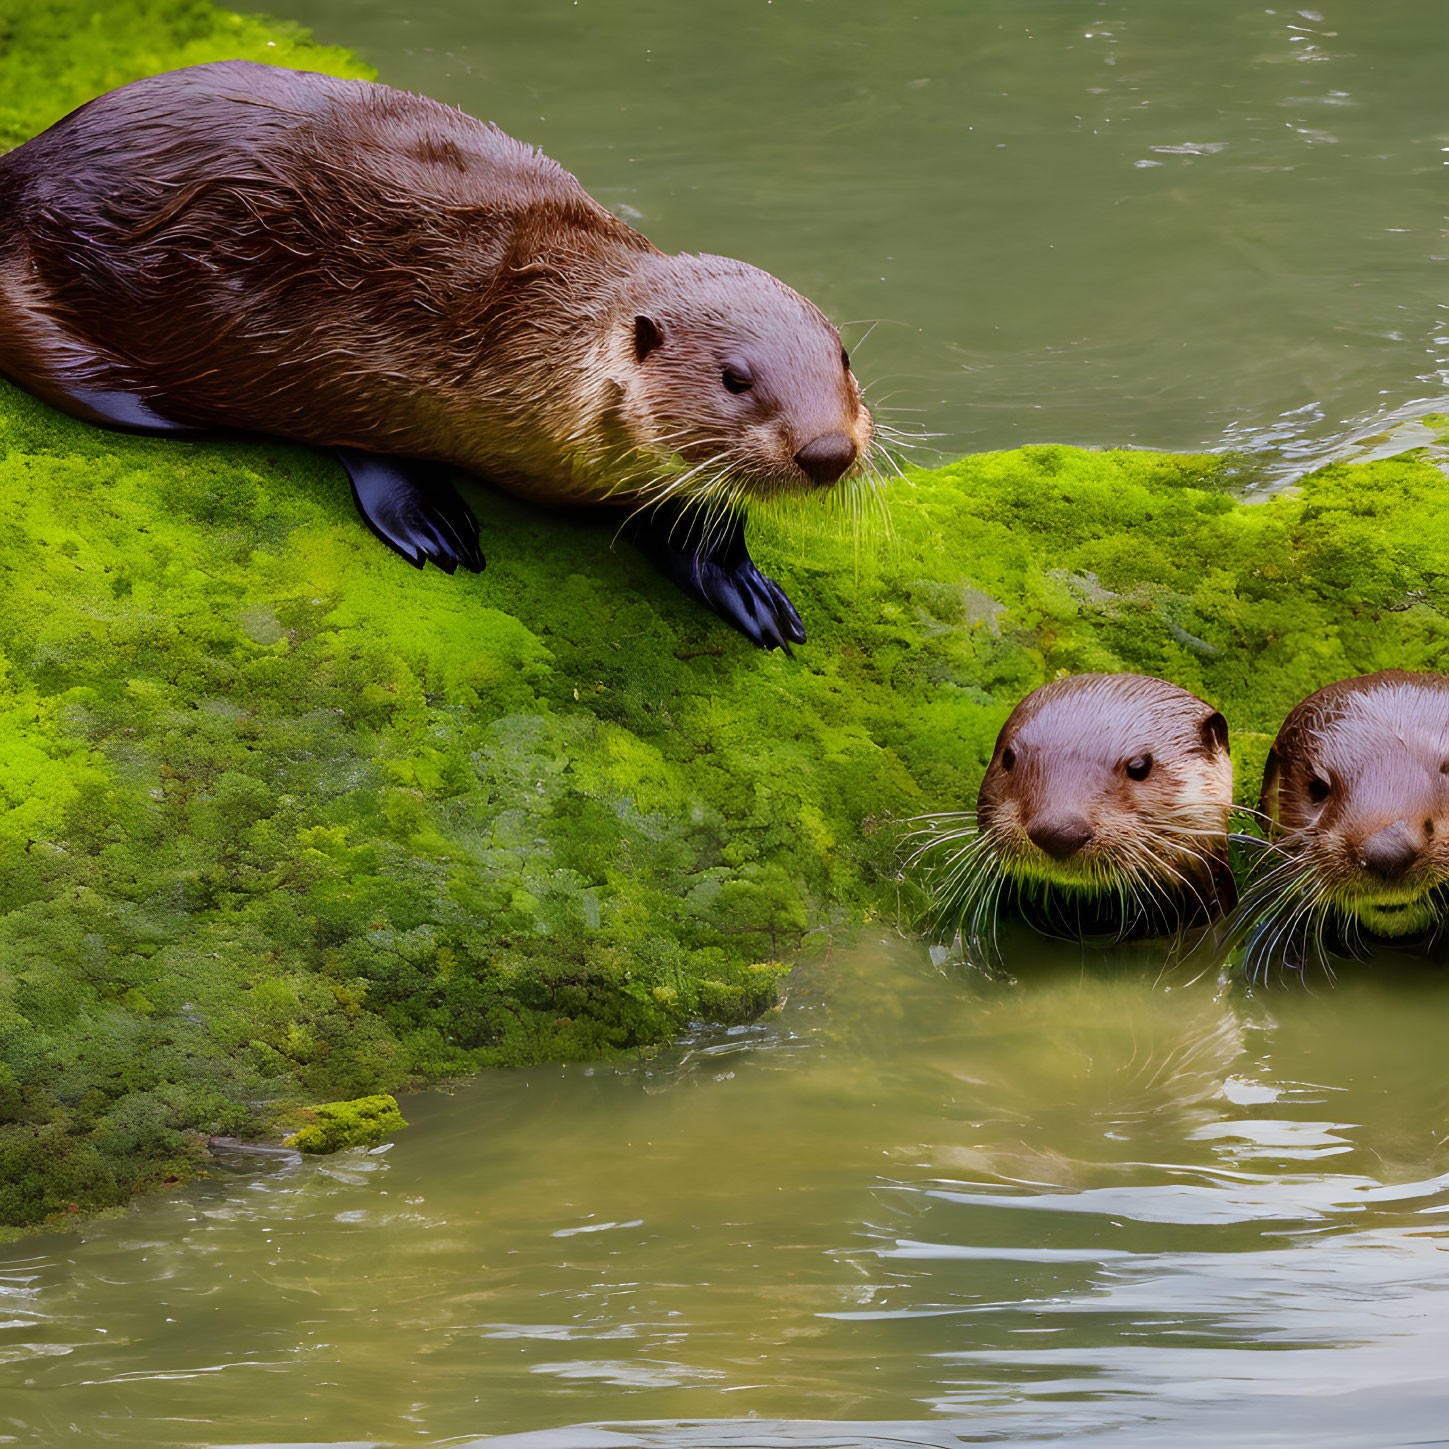 Three otters on moss-covered edge near water, one on bank, two in water